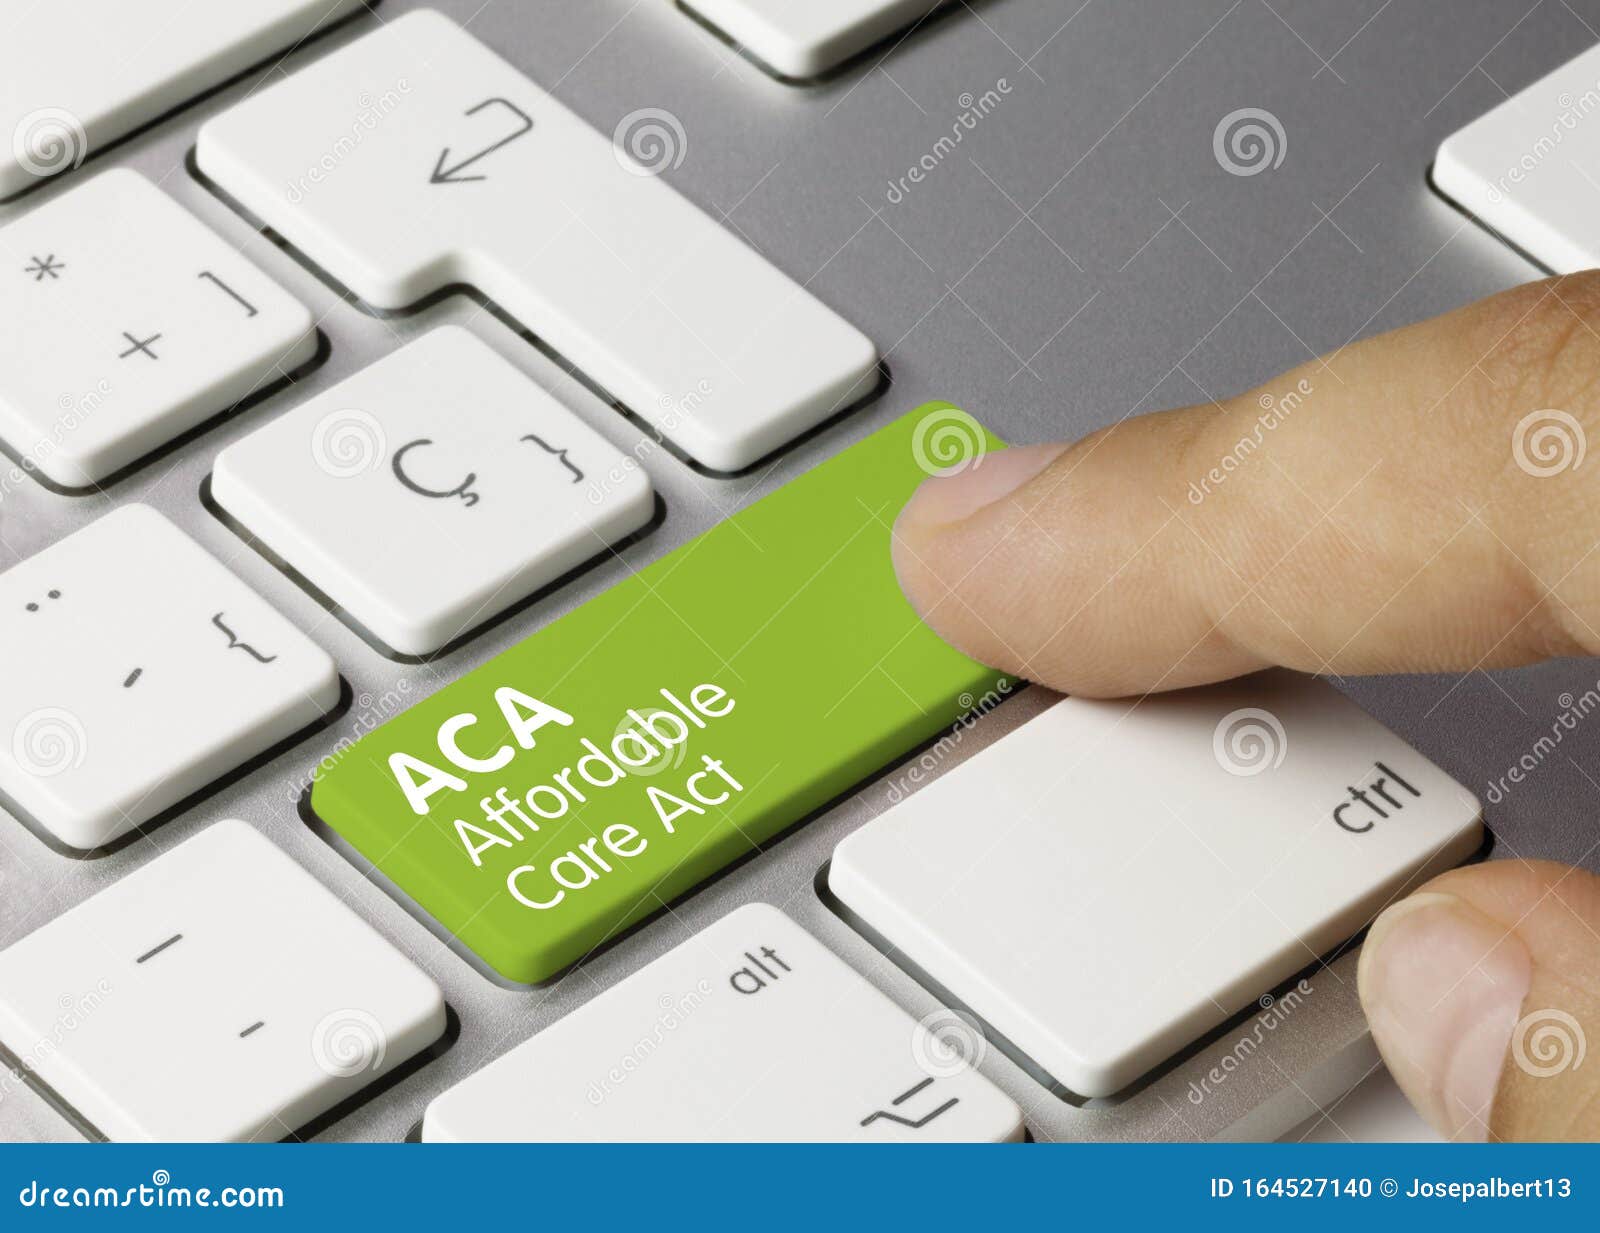 aca affordable care act - inscription on green keyboard key